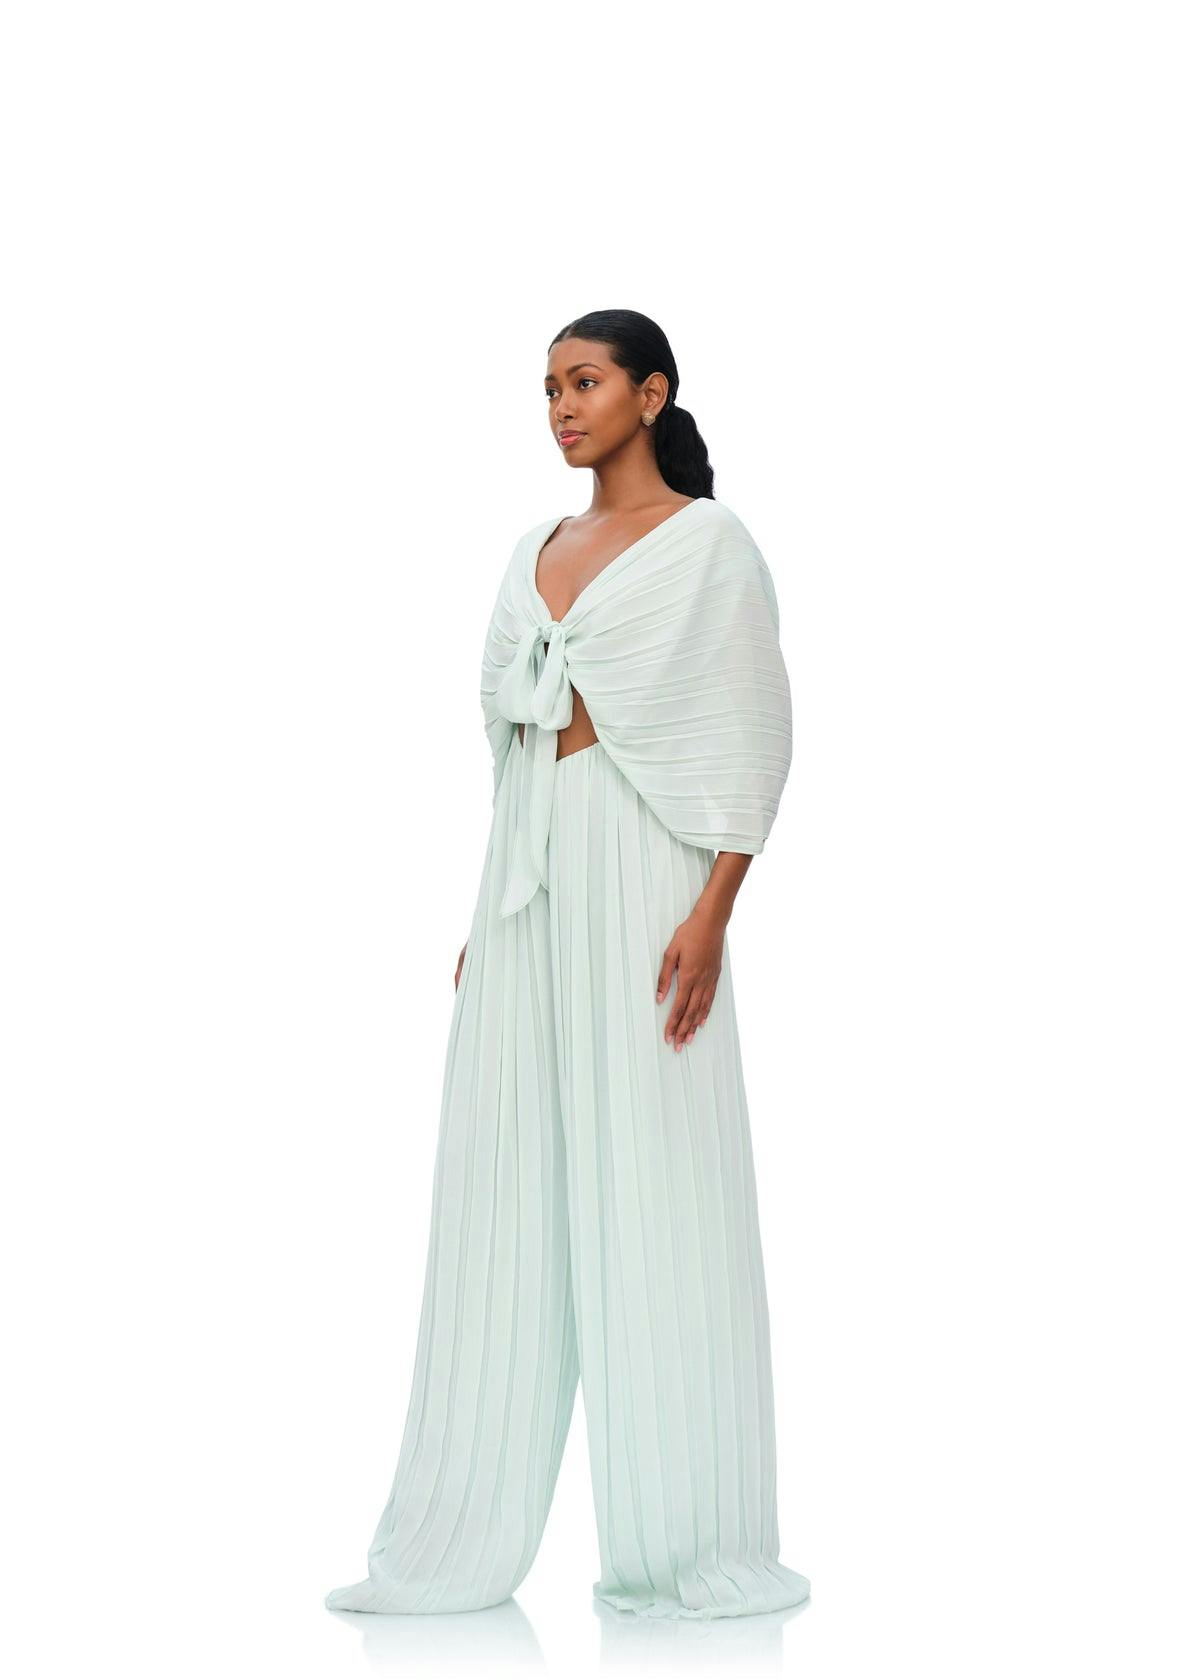 Additional image of Thero Jumpsuit - Mint Blue, a product by Andrea Iyamah